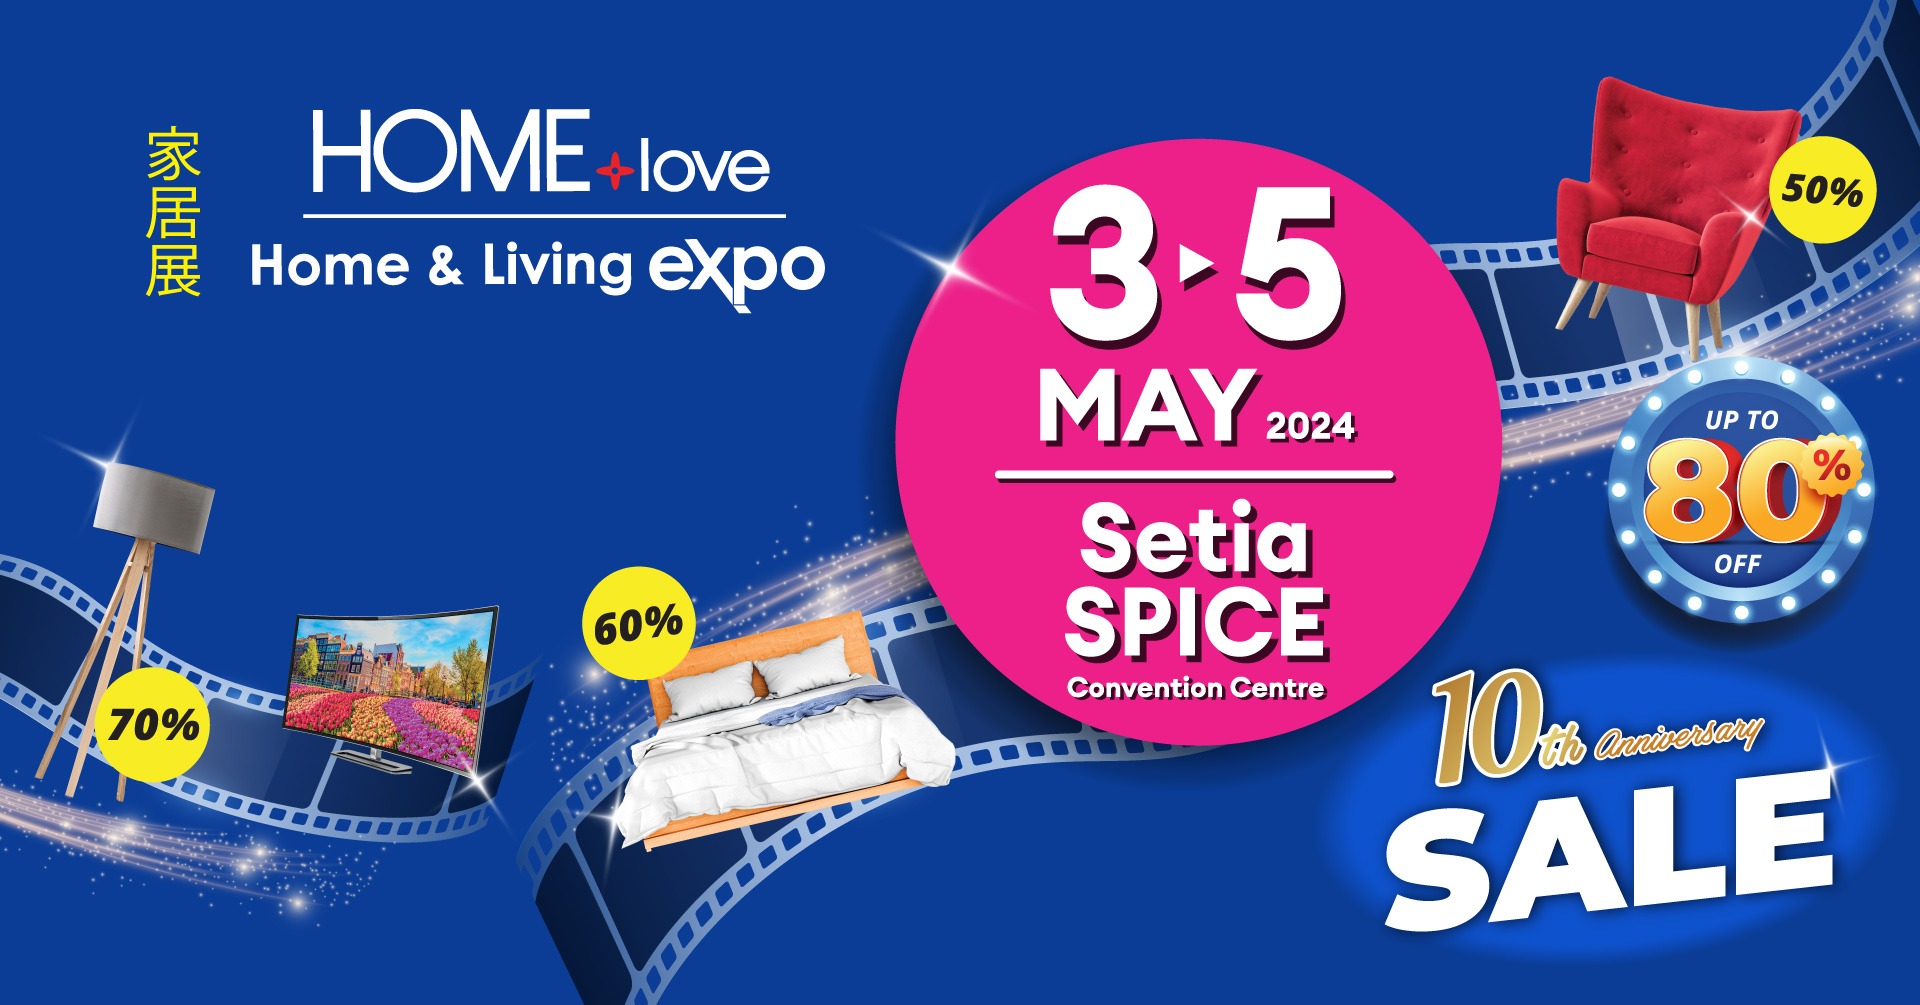 HOMElove Home Expo: Setia SPICE Convention Centre, Penang (3 - 5 May 2024)